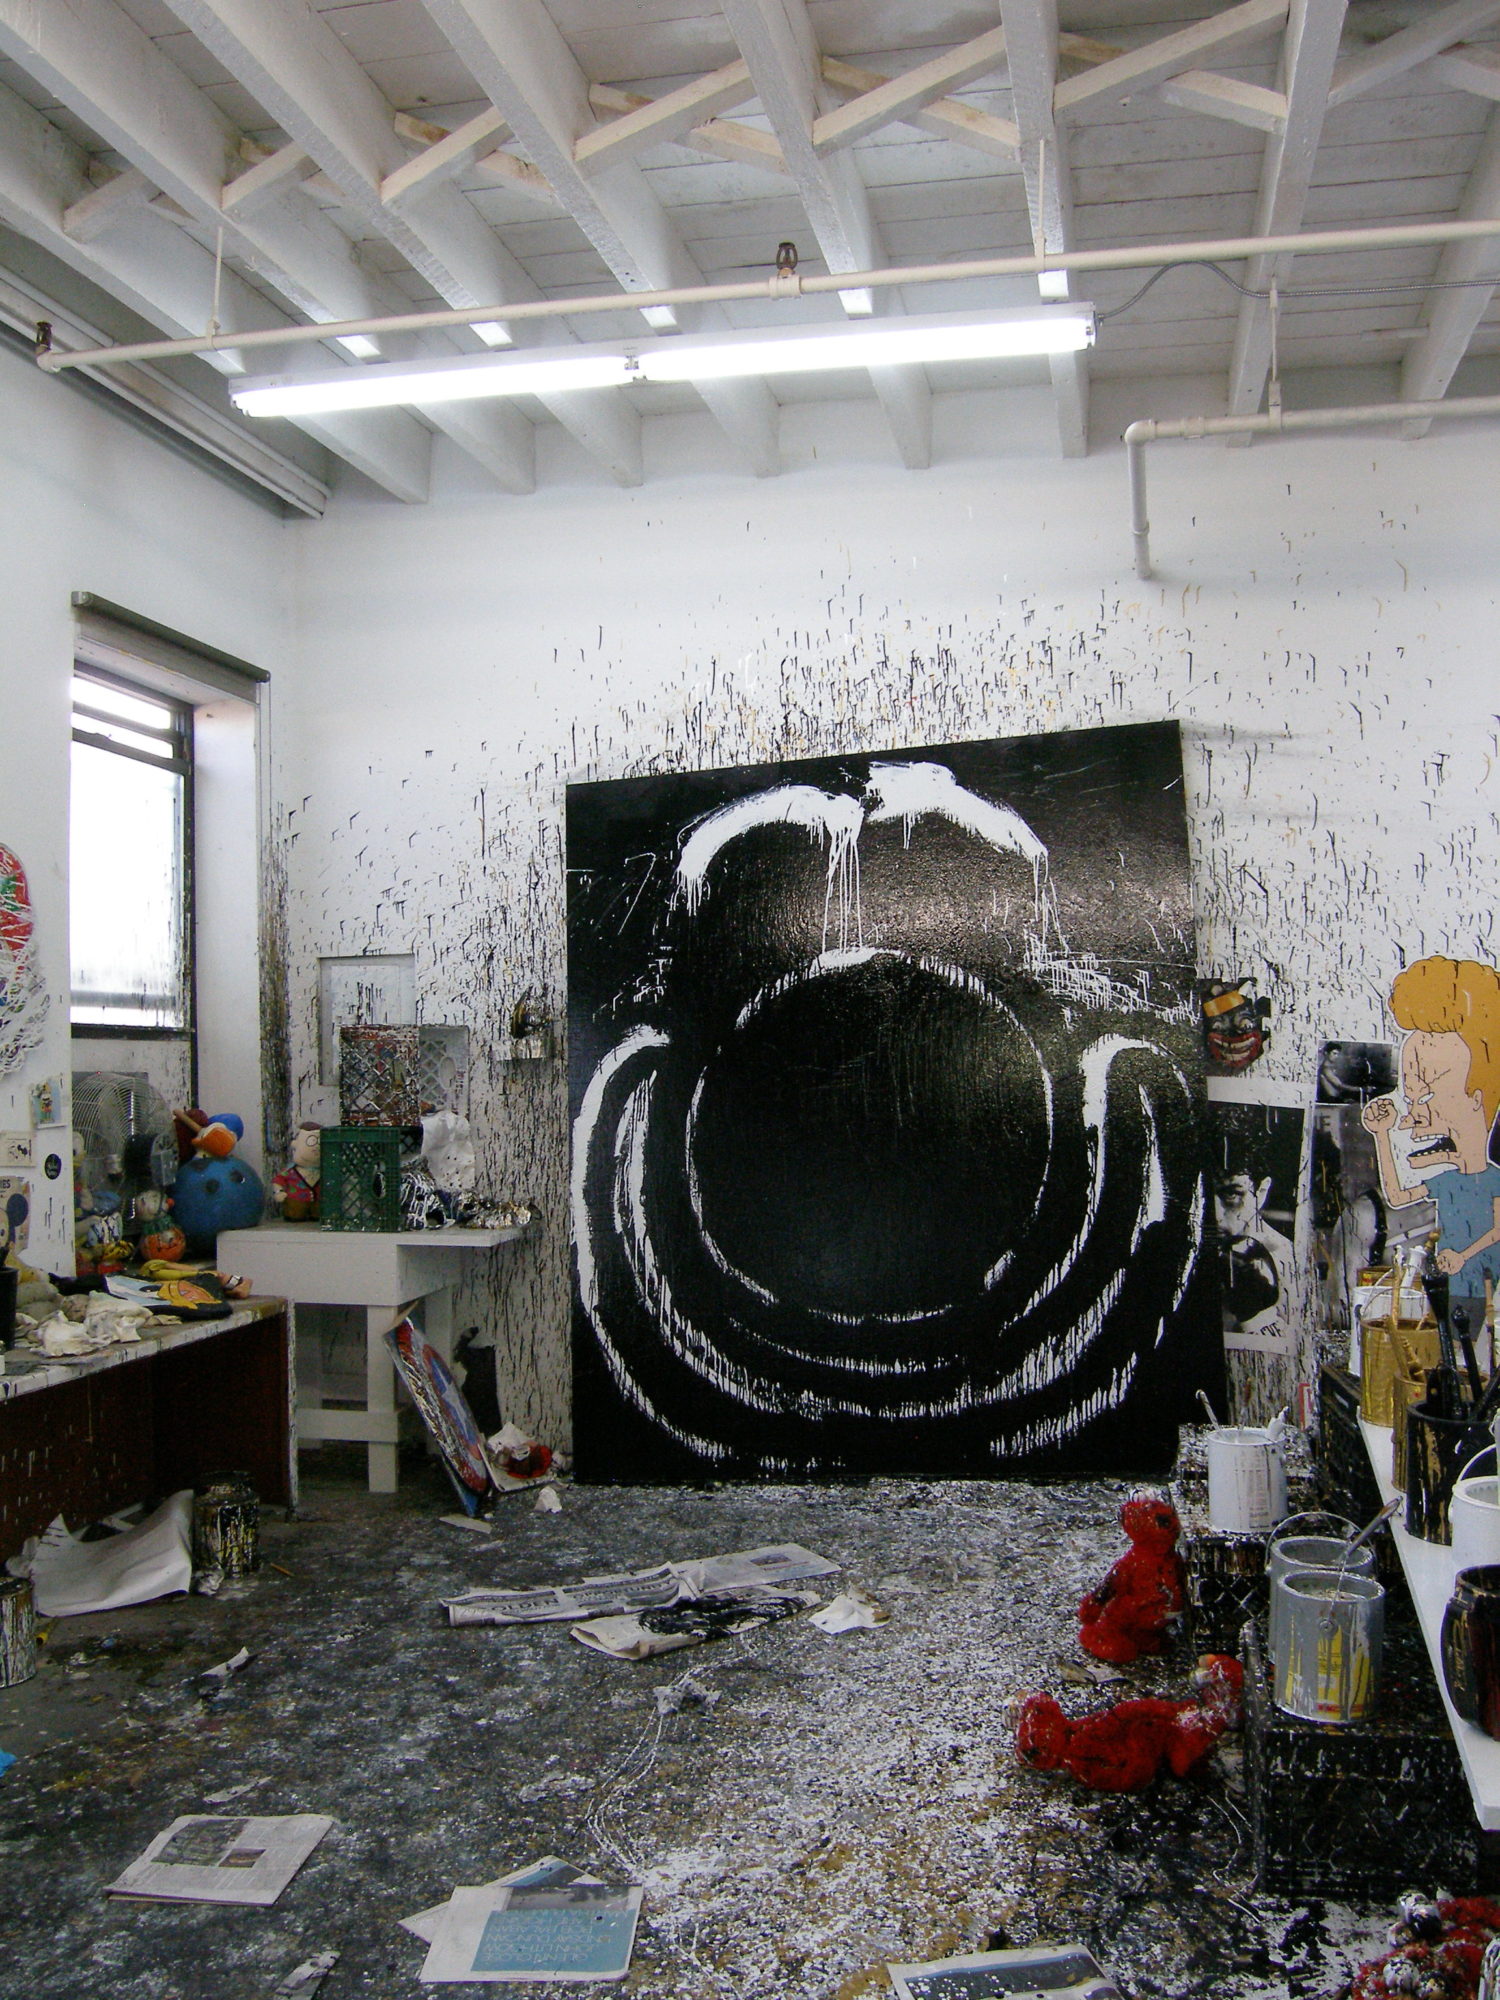 Photo focuses on a view of a cluttered art studio filled with paintings, cartoons, toys and other materials.